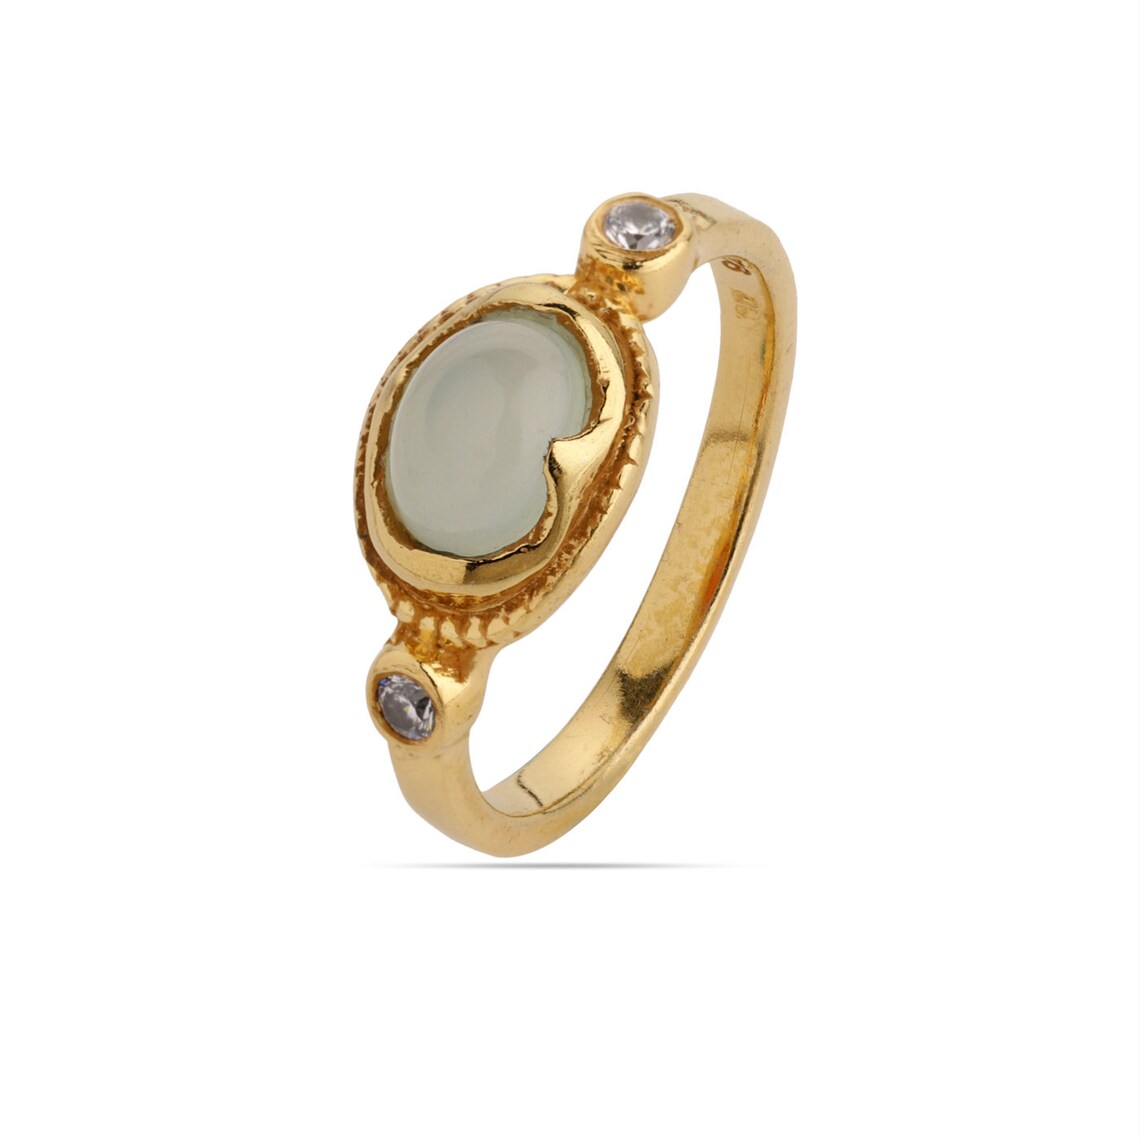 Gold Plated on 925 Sterling Silver Ring - Aqua Chalcedony Ring, Gold Ring, Stacking Ring, CZ and Chalcedony ring, Oval Shape Ring, Aqua Chalcedony Gemstone ring,